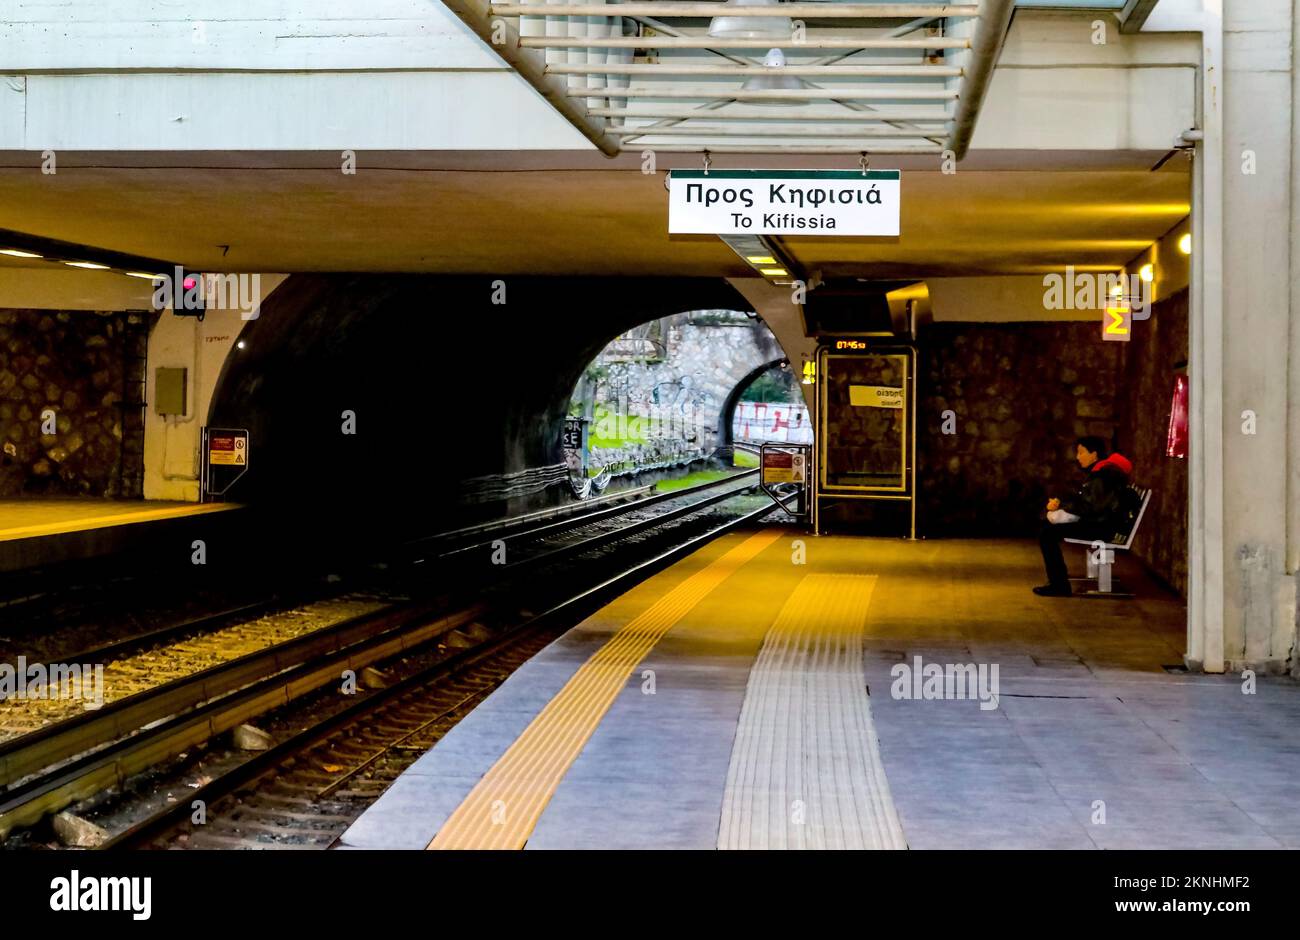 Athens Greece 1 5 2018 Woman waiting at outdoor covered metro station in early morning with a train approaching Stock Photo